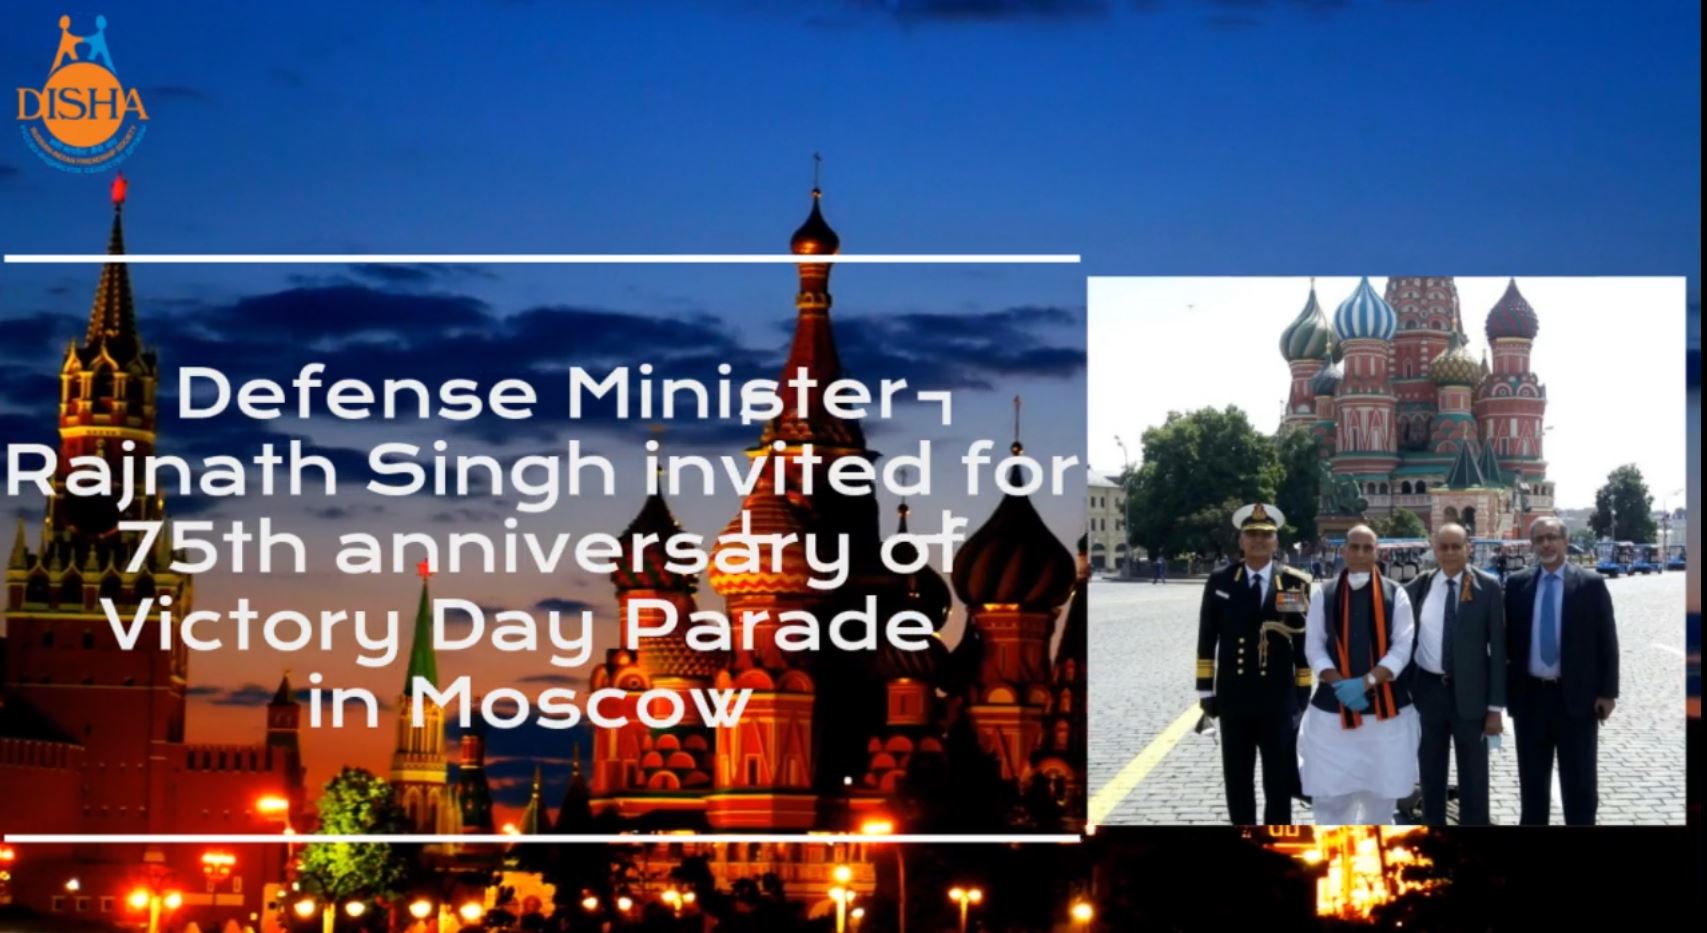 Indian Tri-service participates in Victory Day Parade in Russia - Rajnath Singh attended the Parade